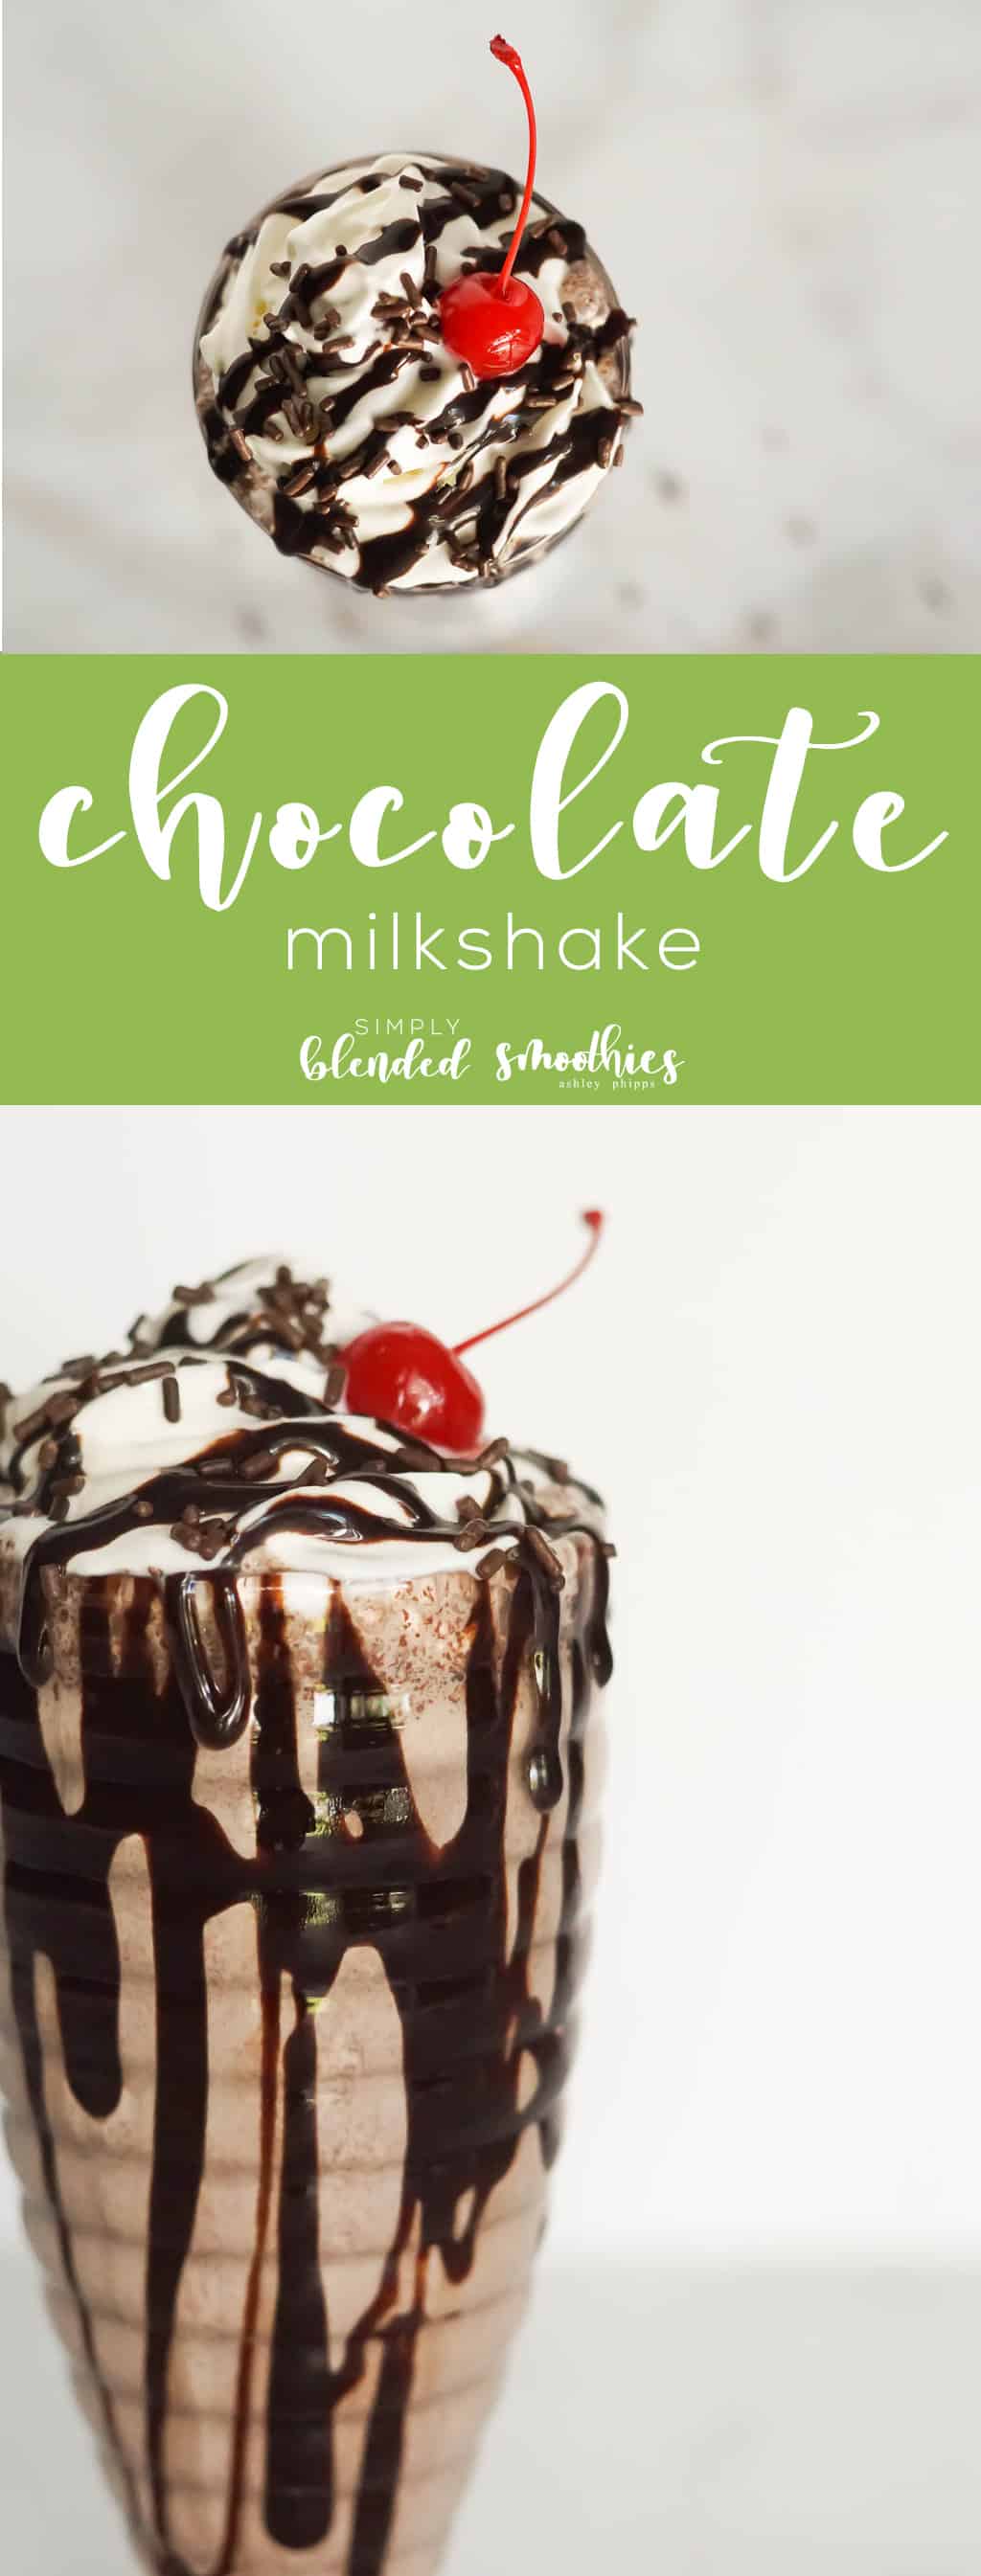 Chocolate Milkshake - This Chocolate Milkshake Recipe Is Rich And Delicious And So Easy To Make